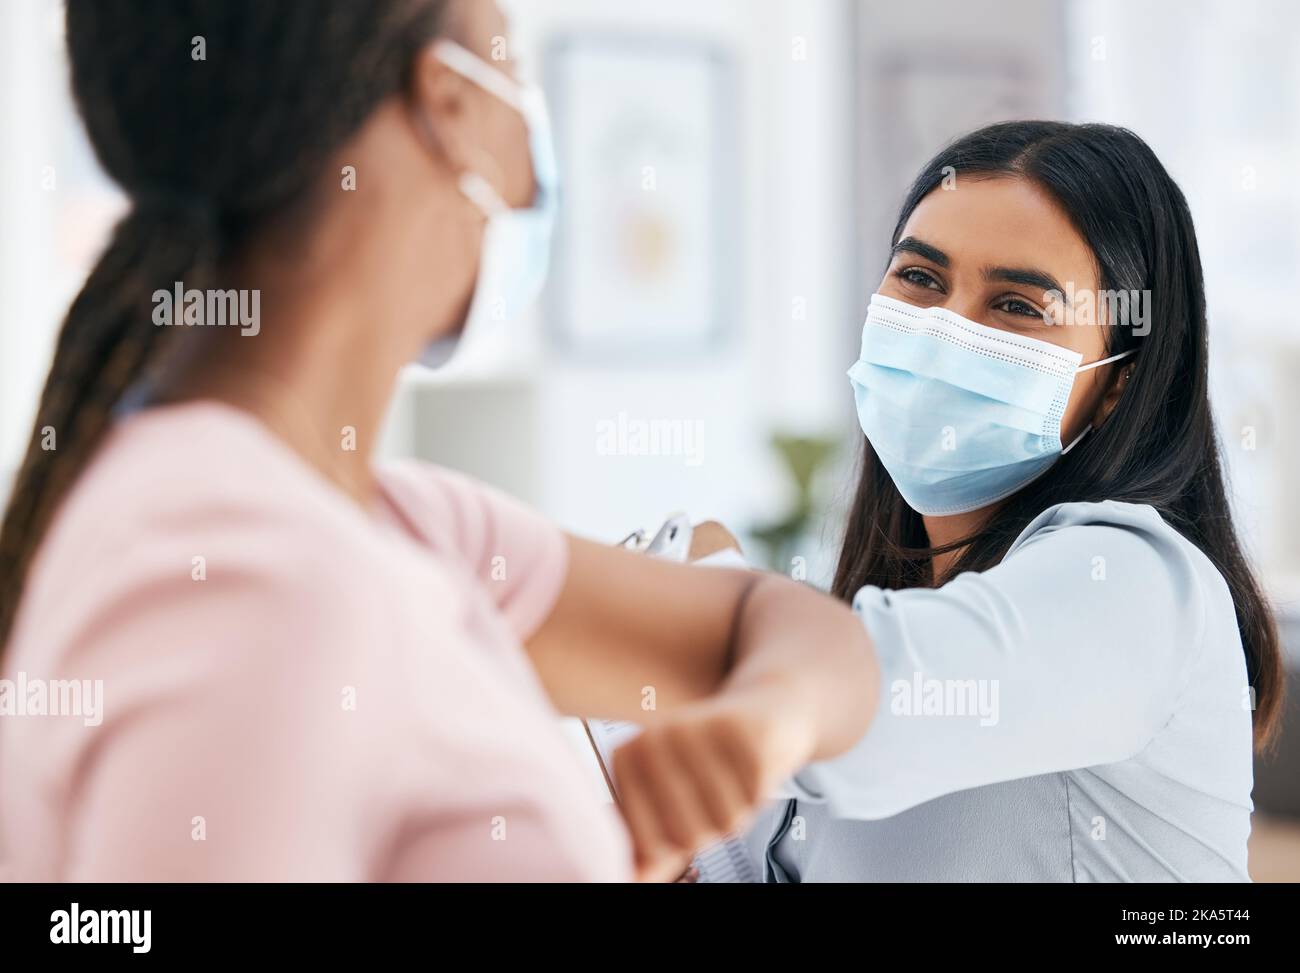 Covid, elbow bump and employees greeting while wearing face mask in office for teamwork and collaboration. Business women social distancing during Stock Photo